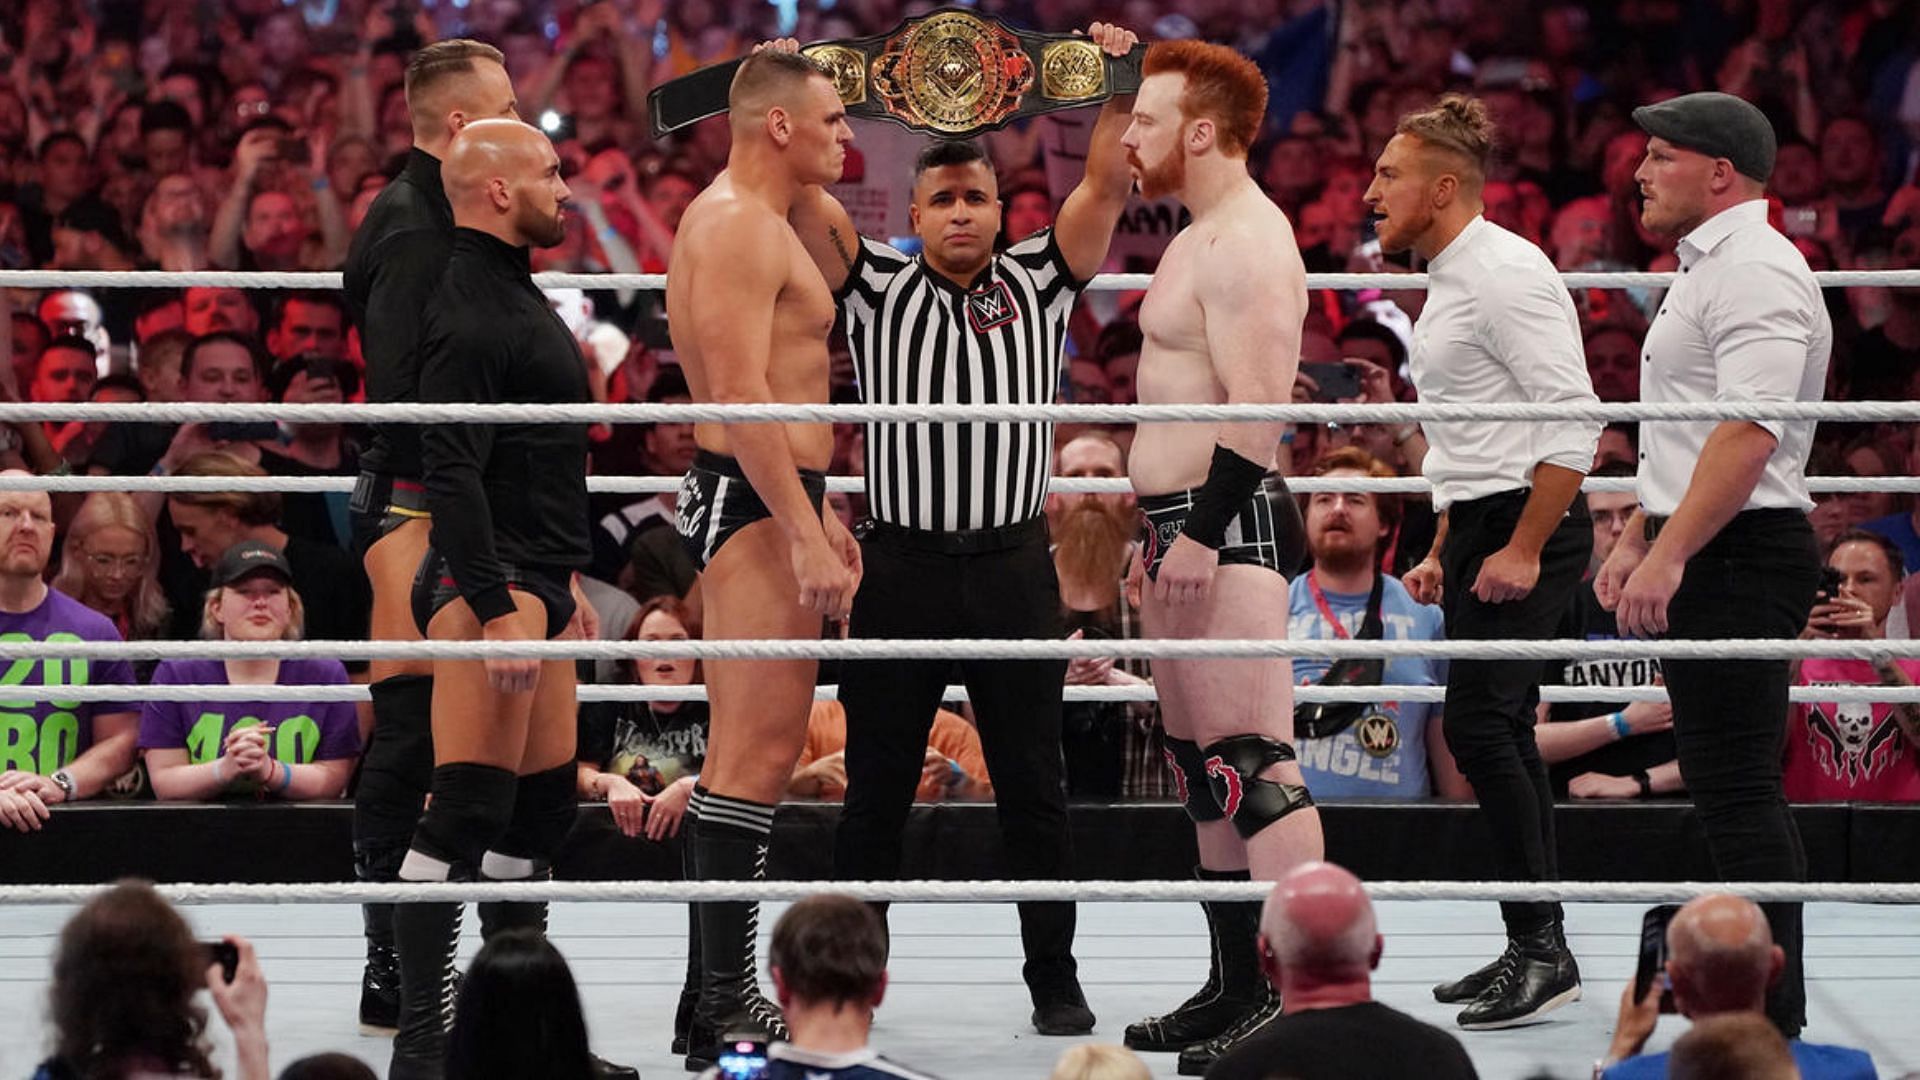 Gunther defended the IC Title against Sheamus at WWE Clash at the Castle